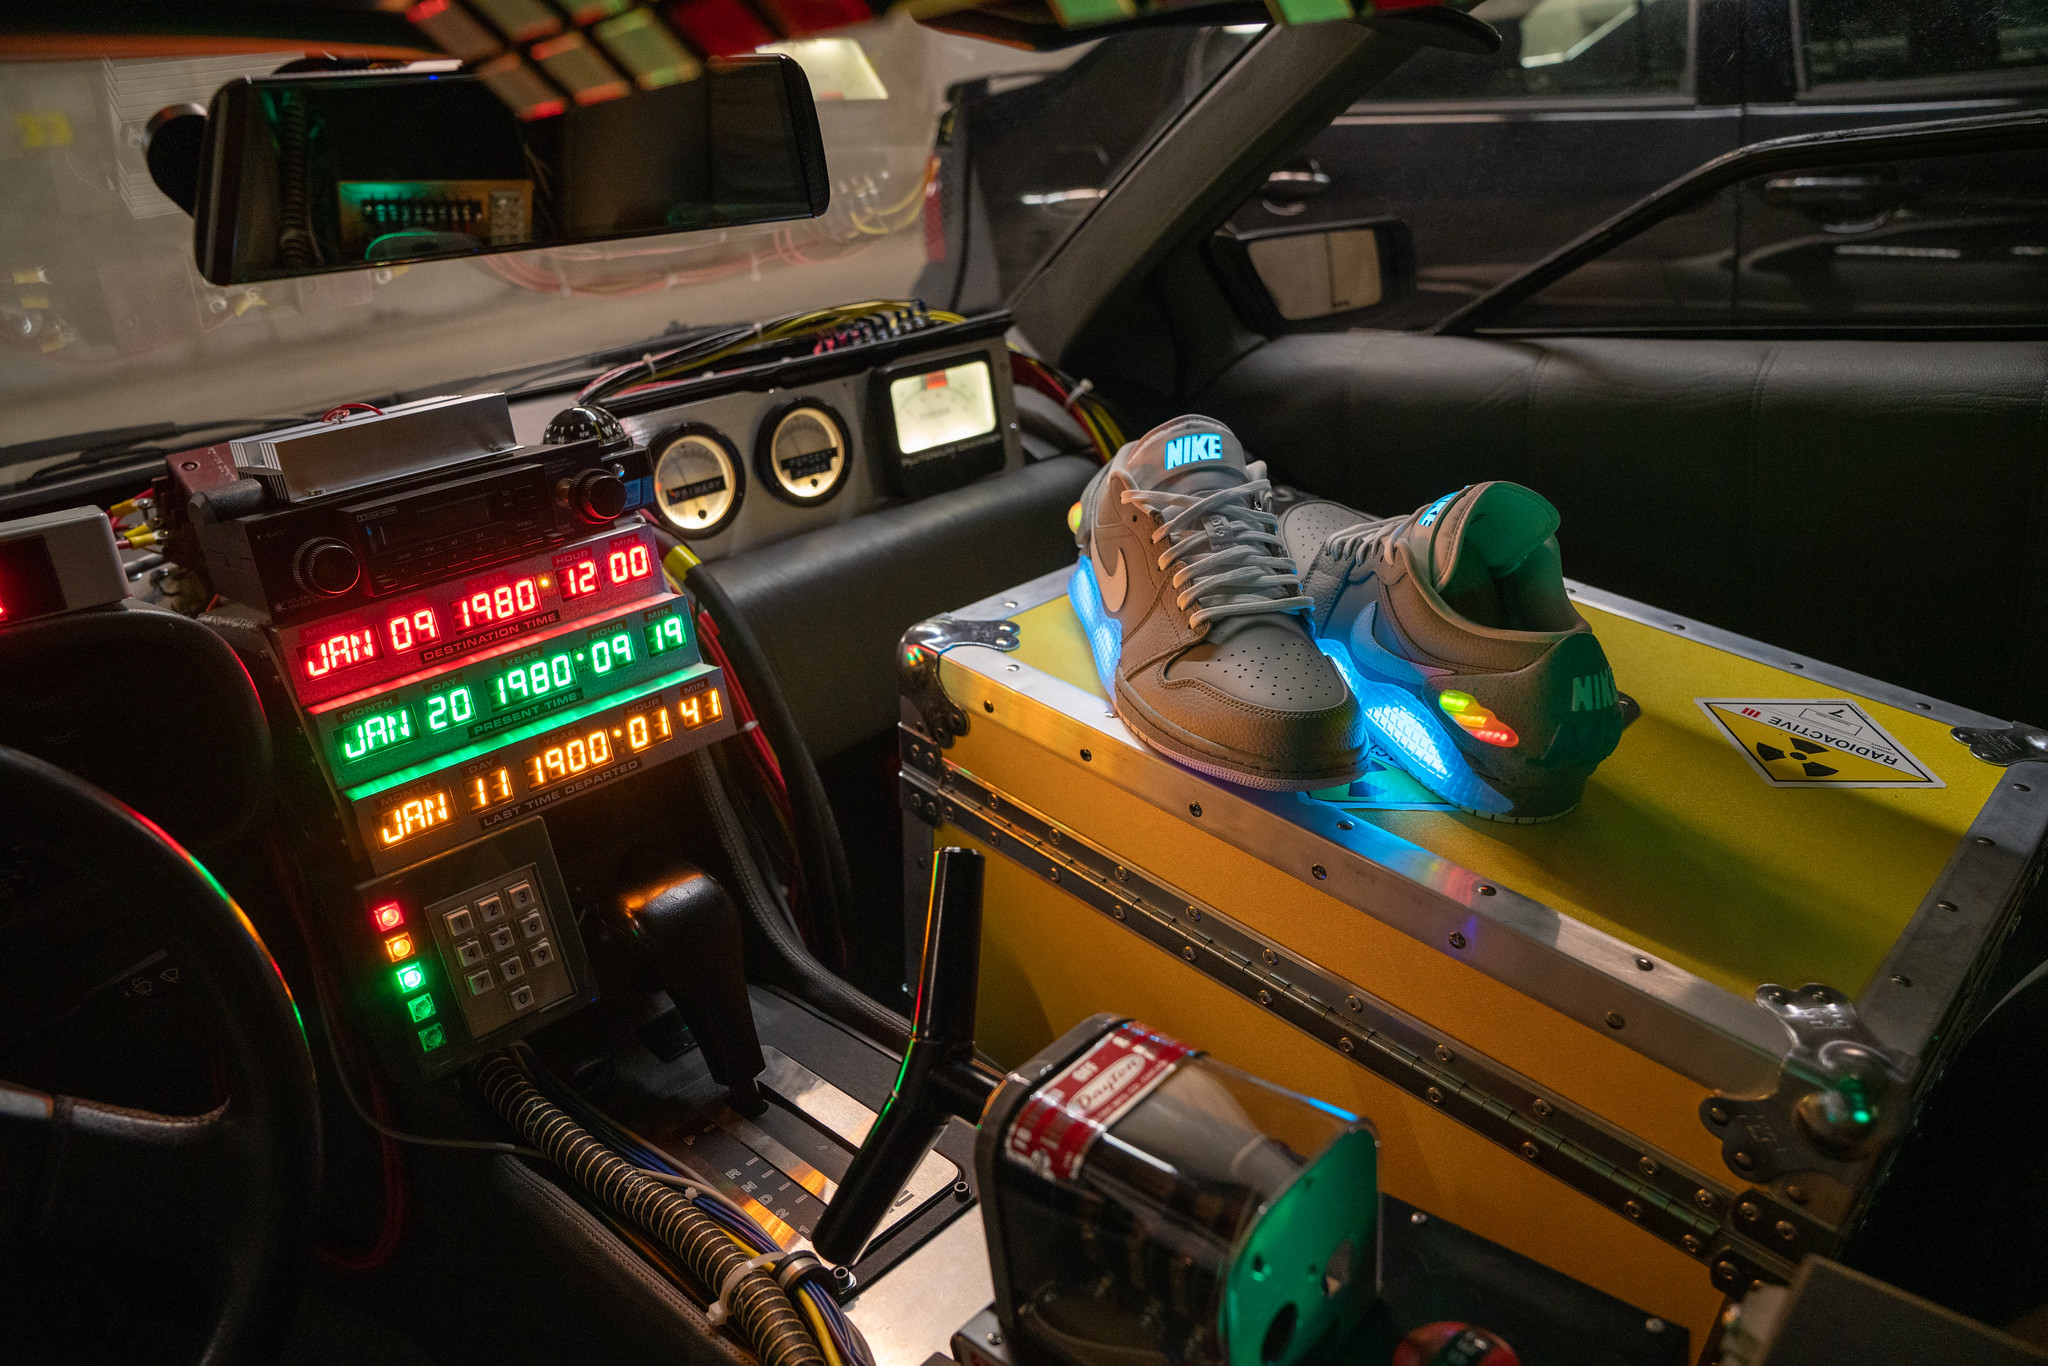 DeLorean 'Time Machine' replica interior: Time circuit switch and display, a hoverboard, plutonium case with stickers, and some custom Nike Air Jordan sneakers modified to include the blue 'Mag' cut-outs and heel caps similar to the sneakers in the second movie.